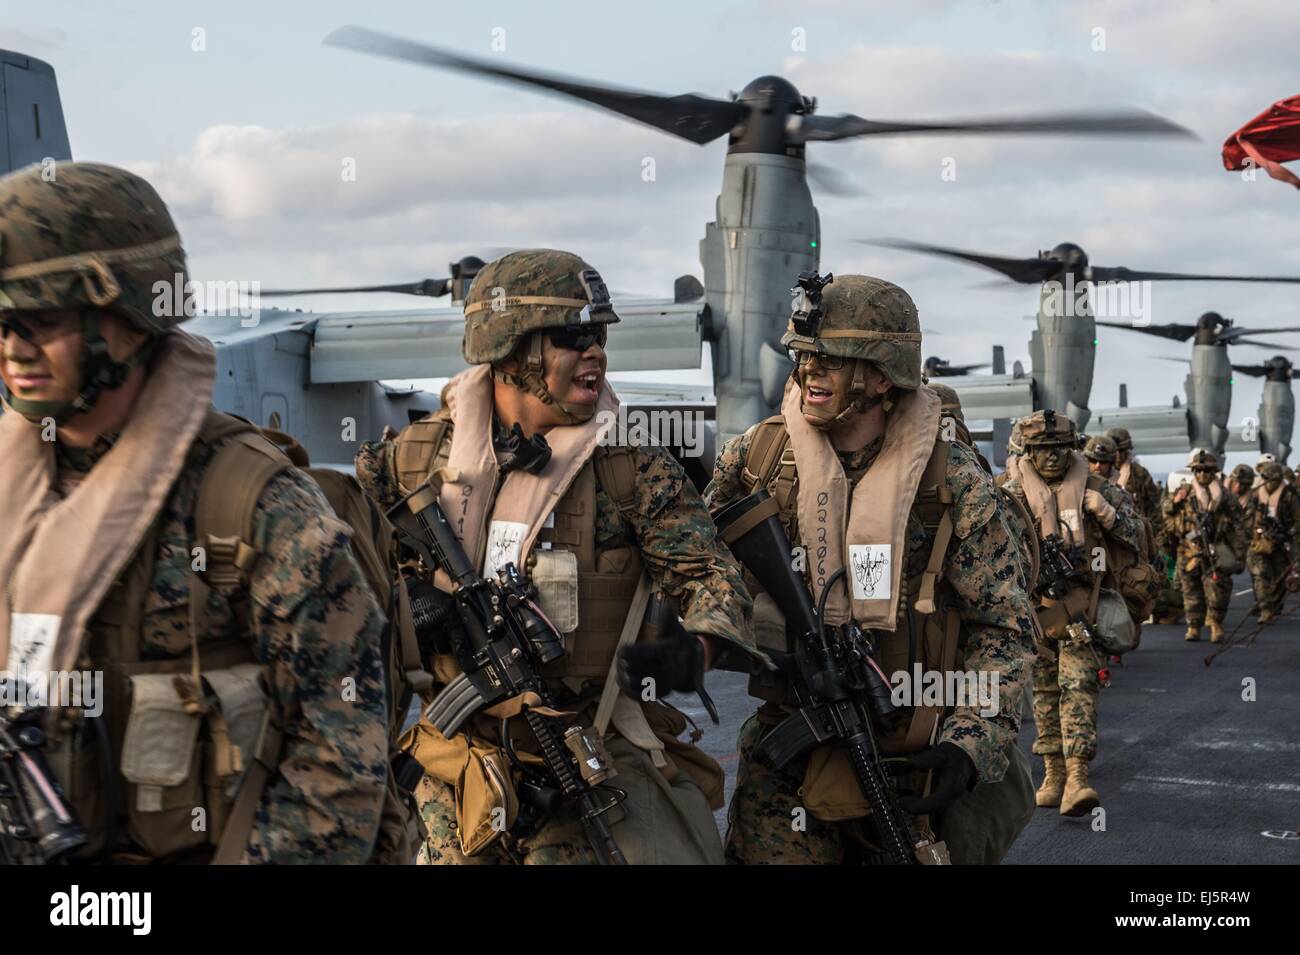 US Marines from the 31st Marine Expeditionary Unit prepare to board MV-22 Osprey tilt rotor aircraft on the flight deck of the amphibious assault ship USS Bonhomme Richard March 19, 2015 in the East China Sea. Stock Photo